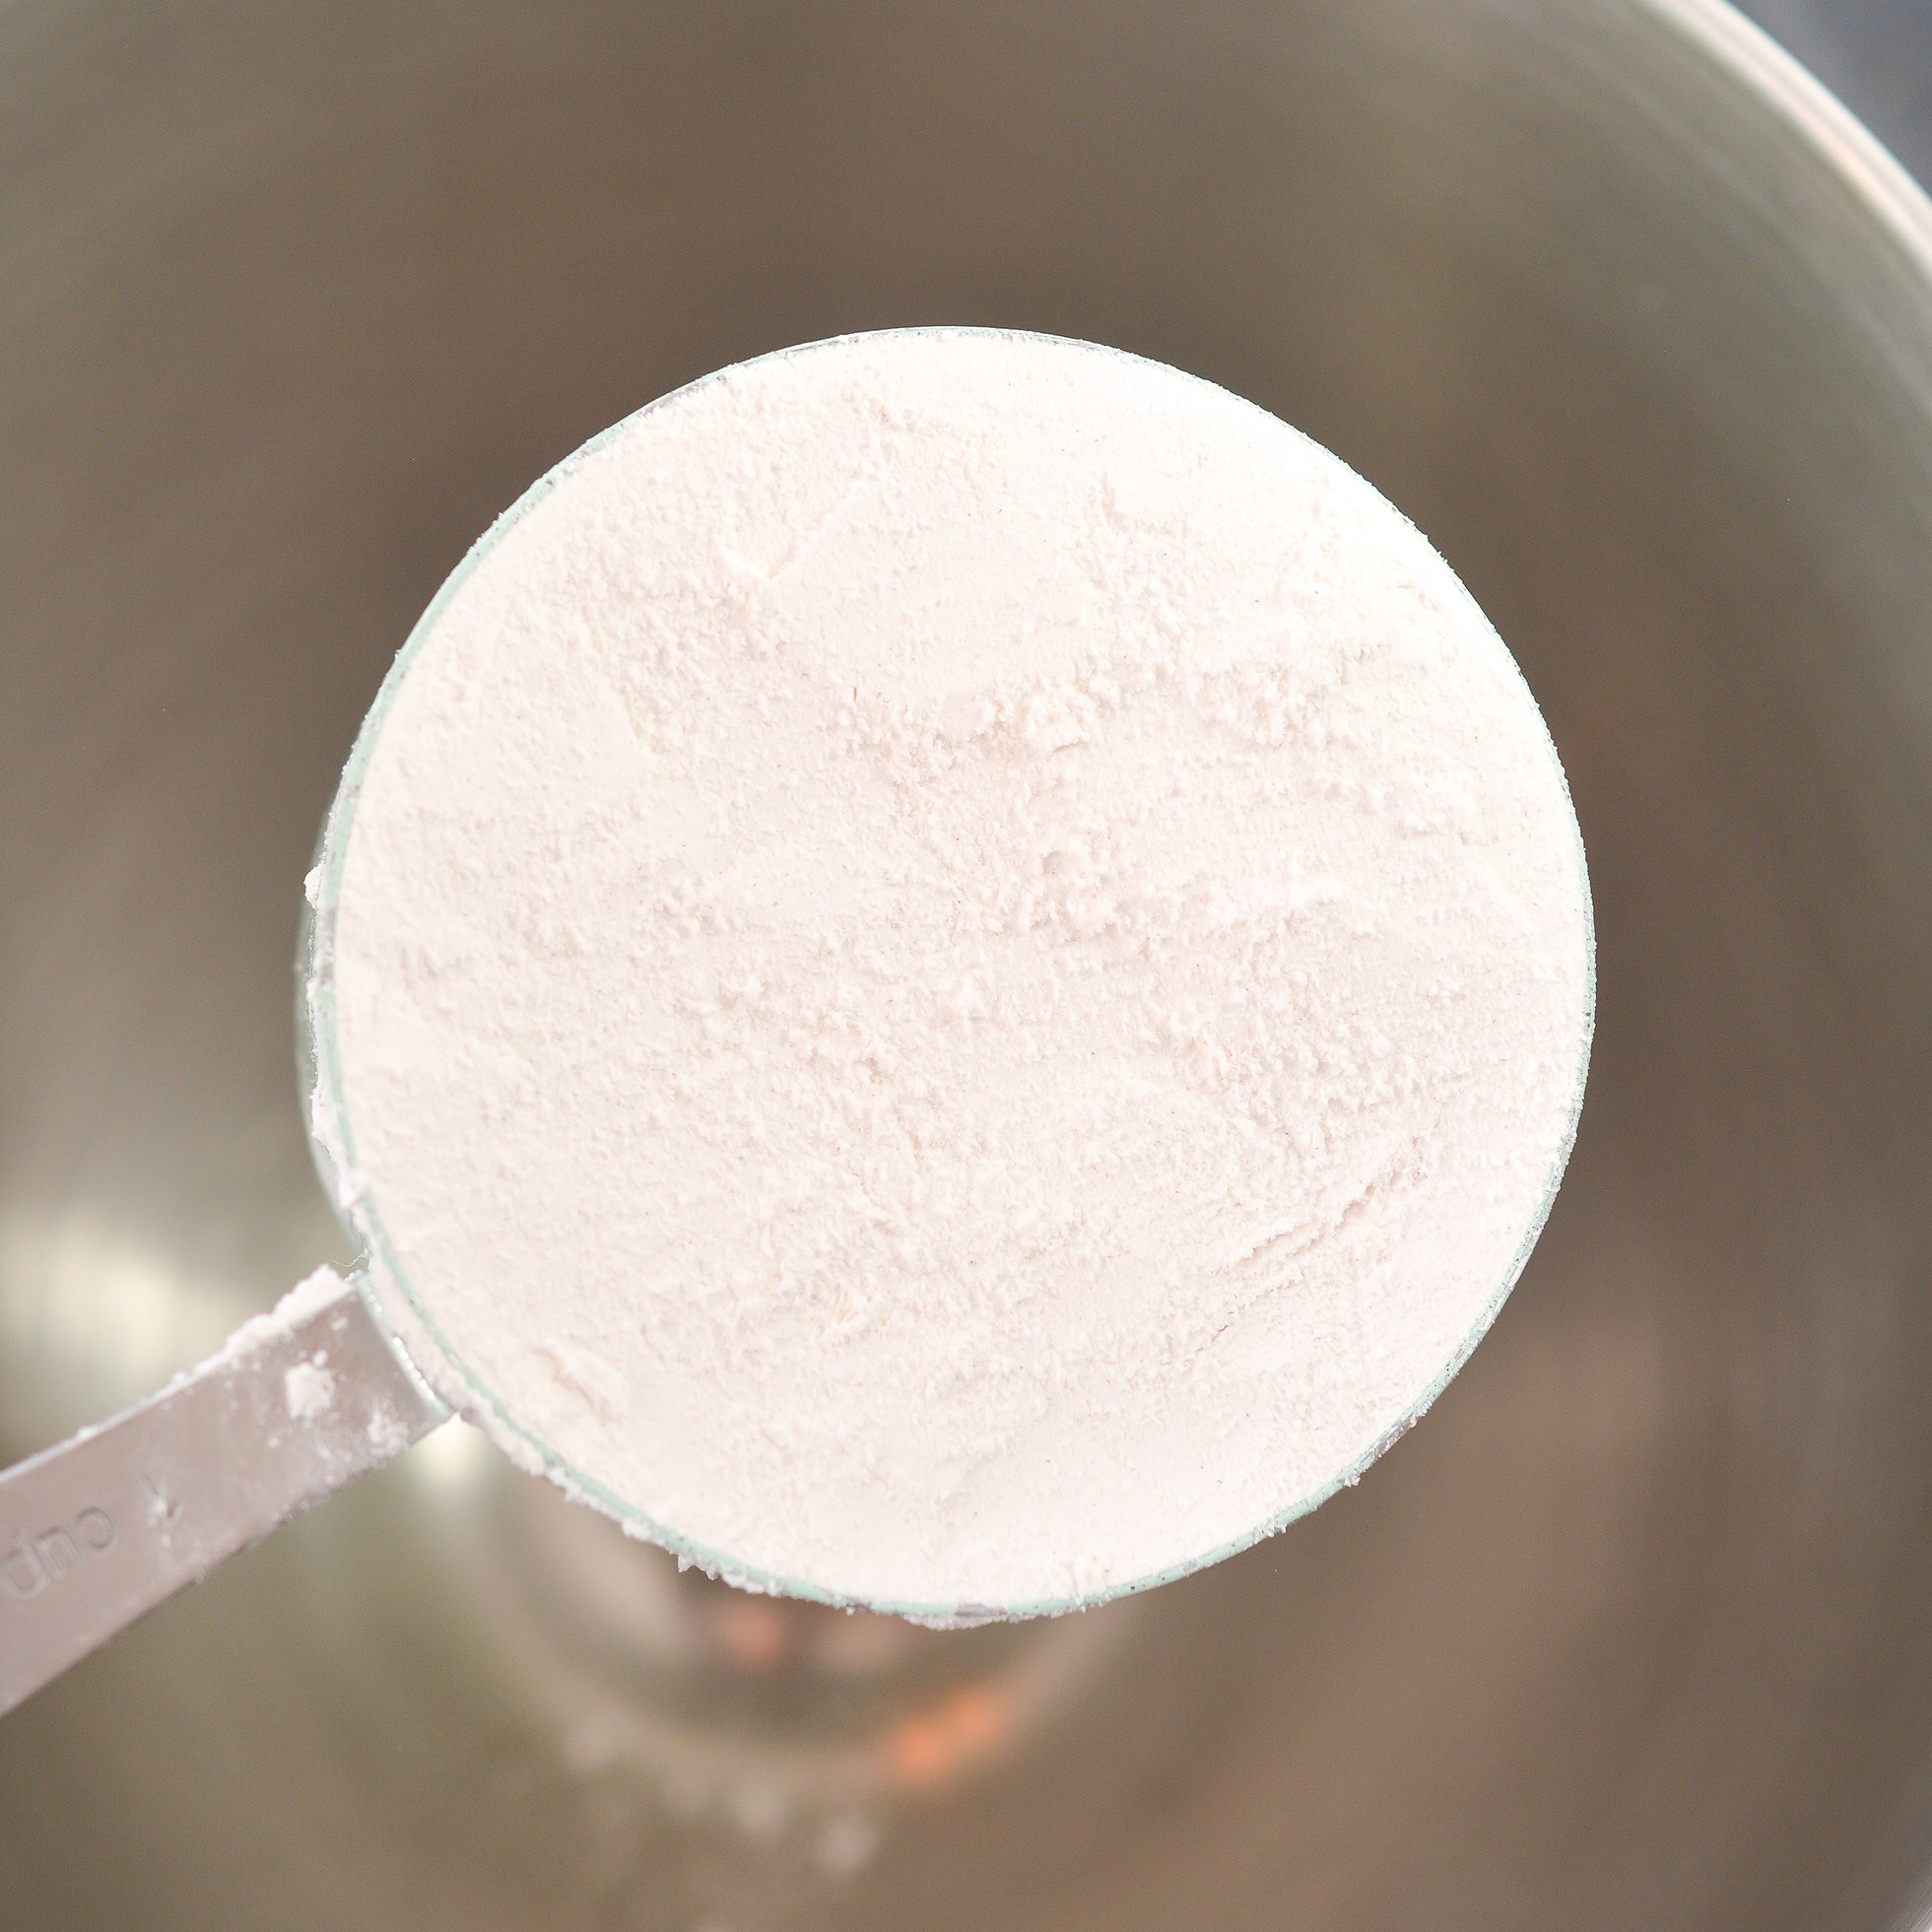 Mix together the flour, sugar, salt, baking soda, ground cinnamon, melted butter and eggs.